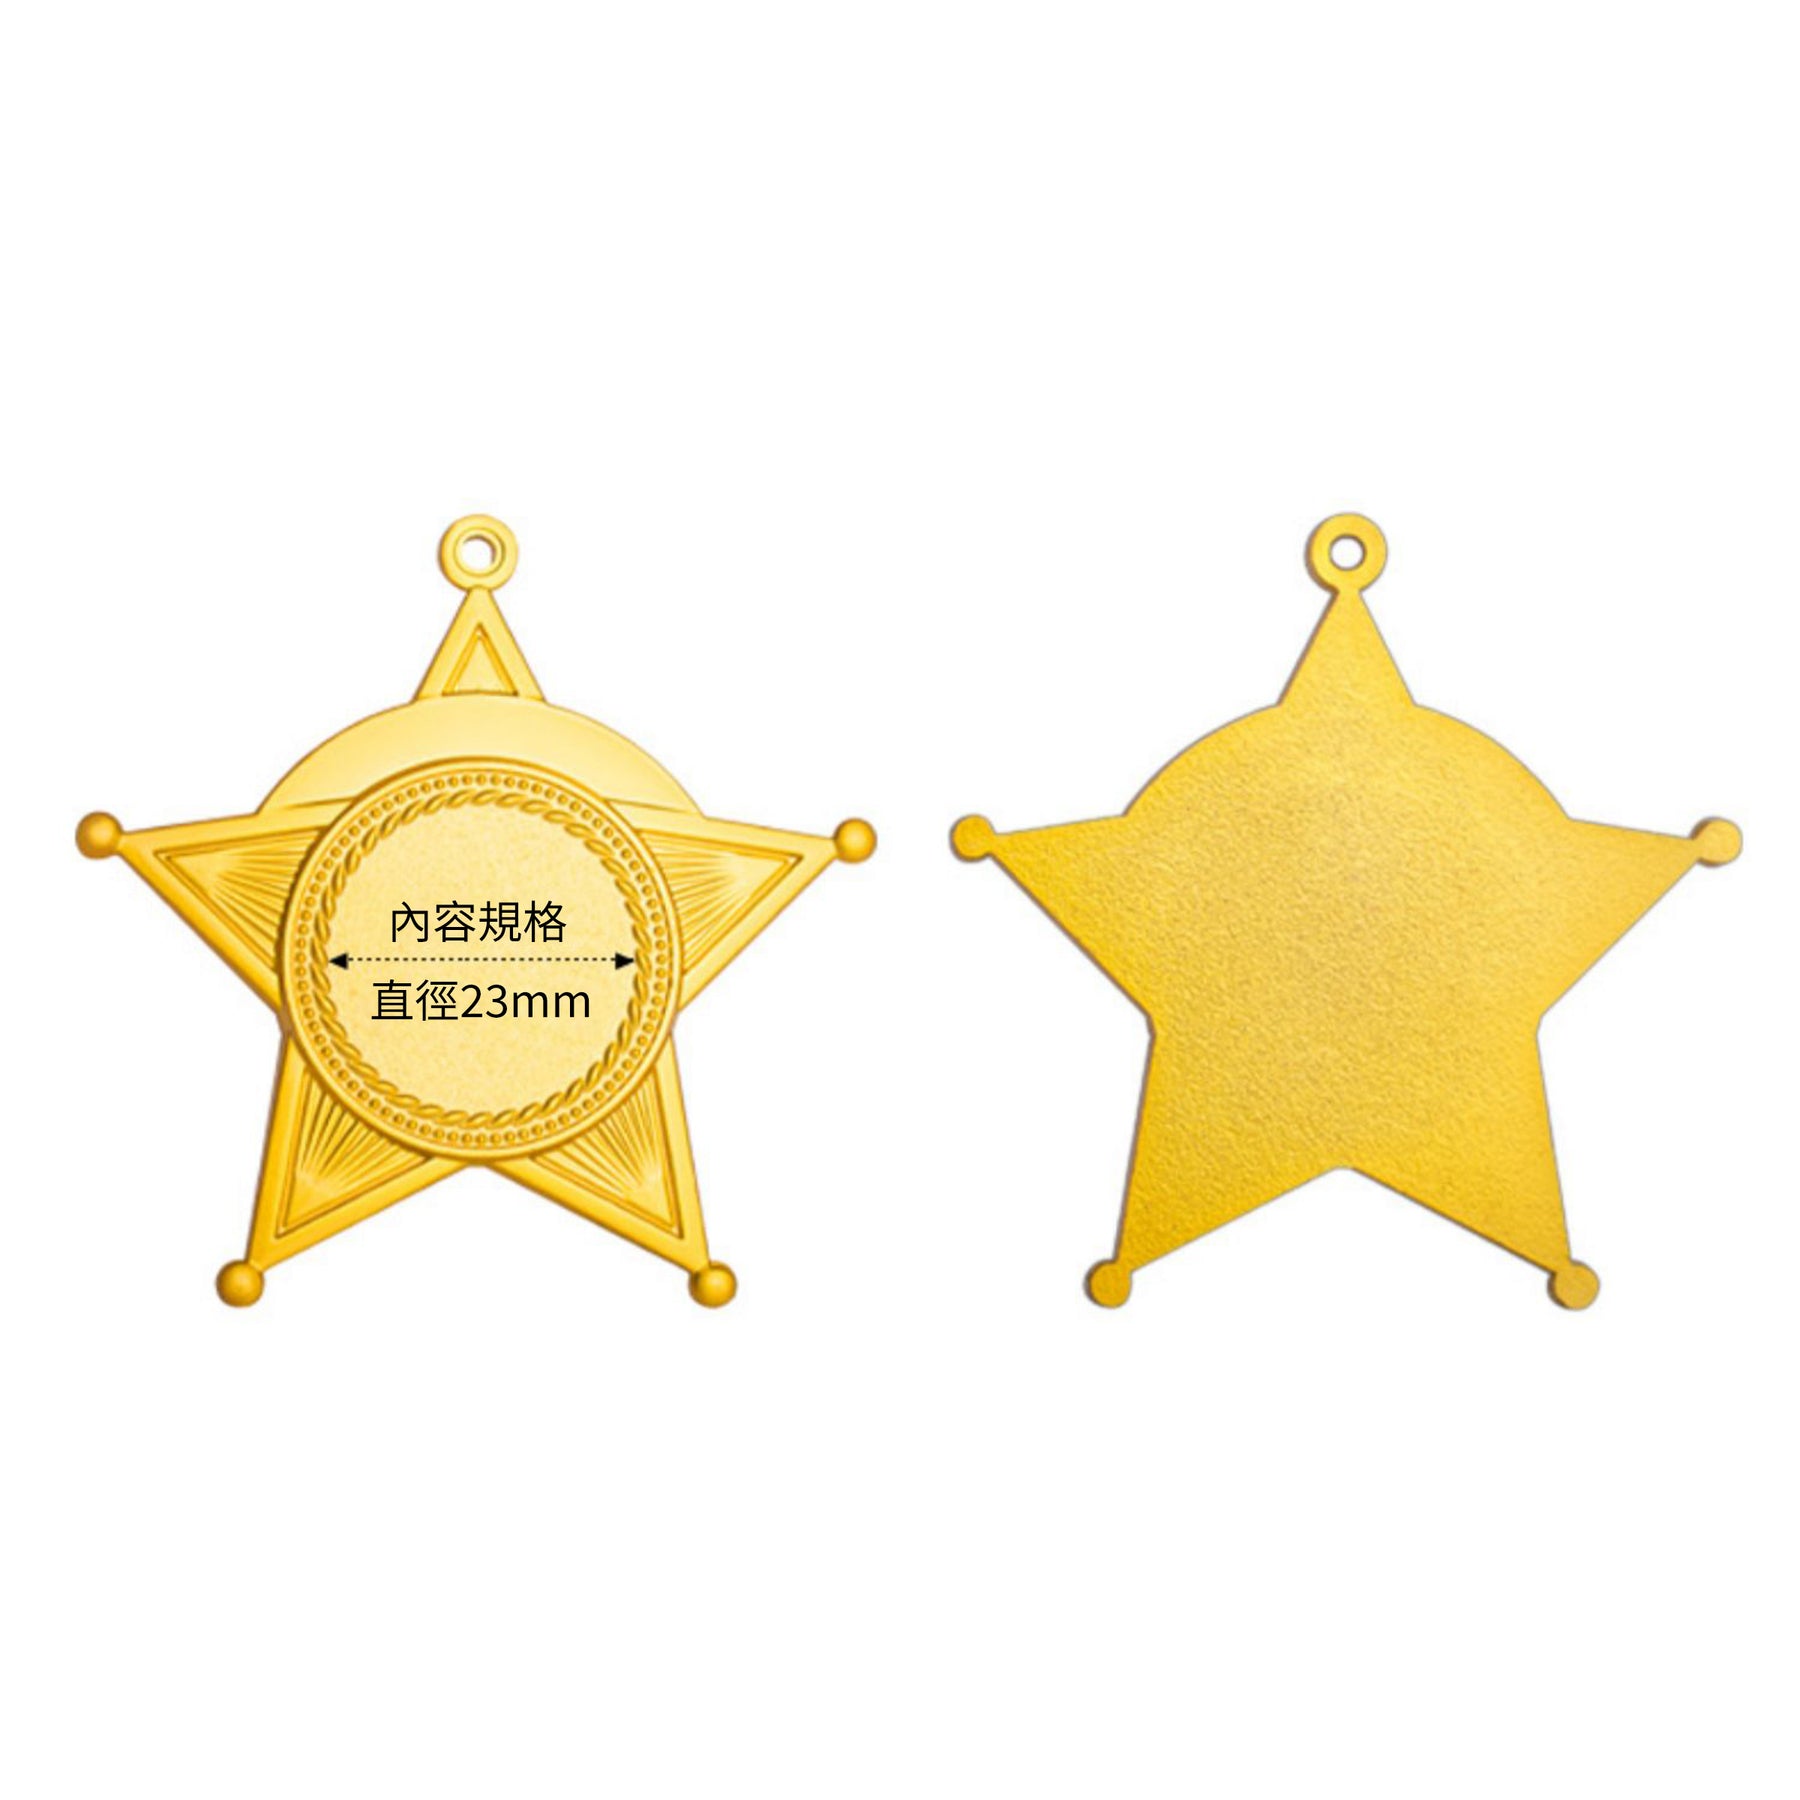 Creative Children And Youth Medals | 通用五角星獎牌訂製 運動會掛牌榮譽獎章